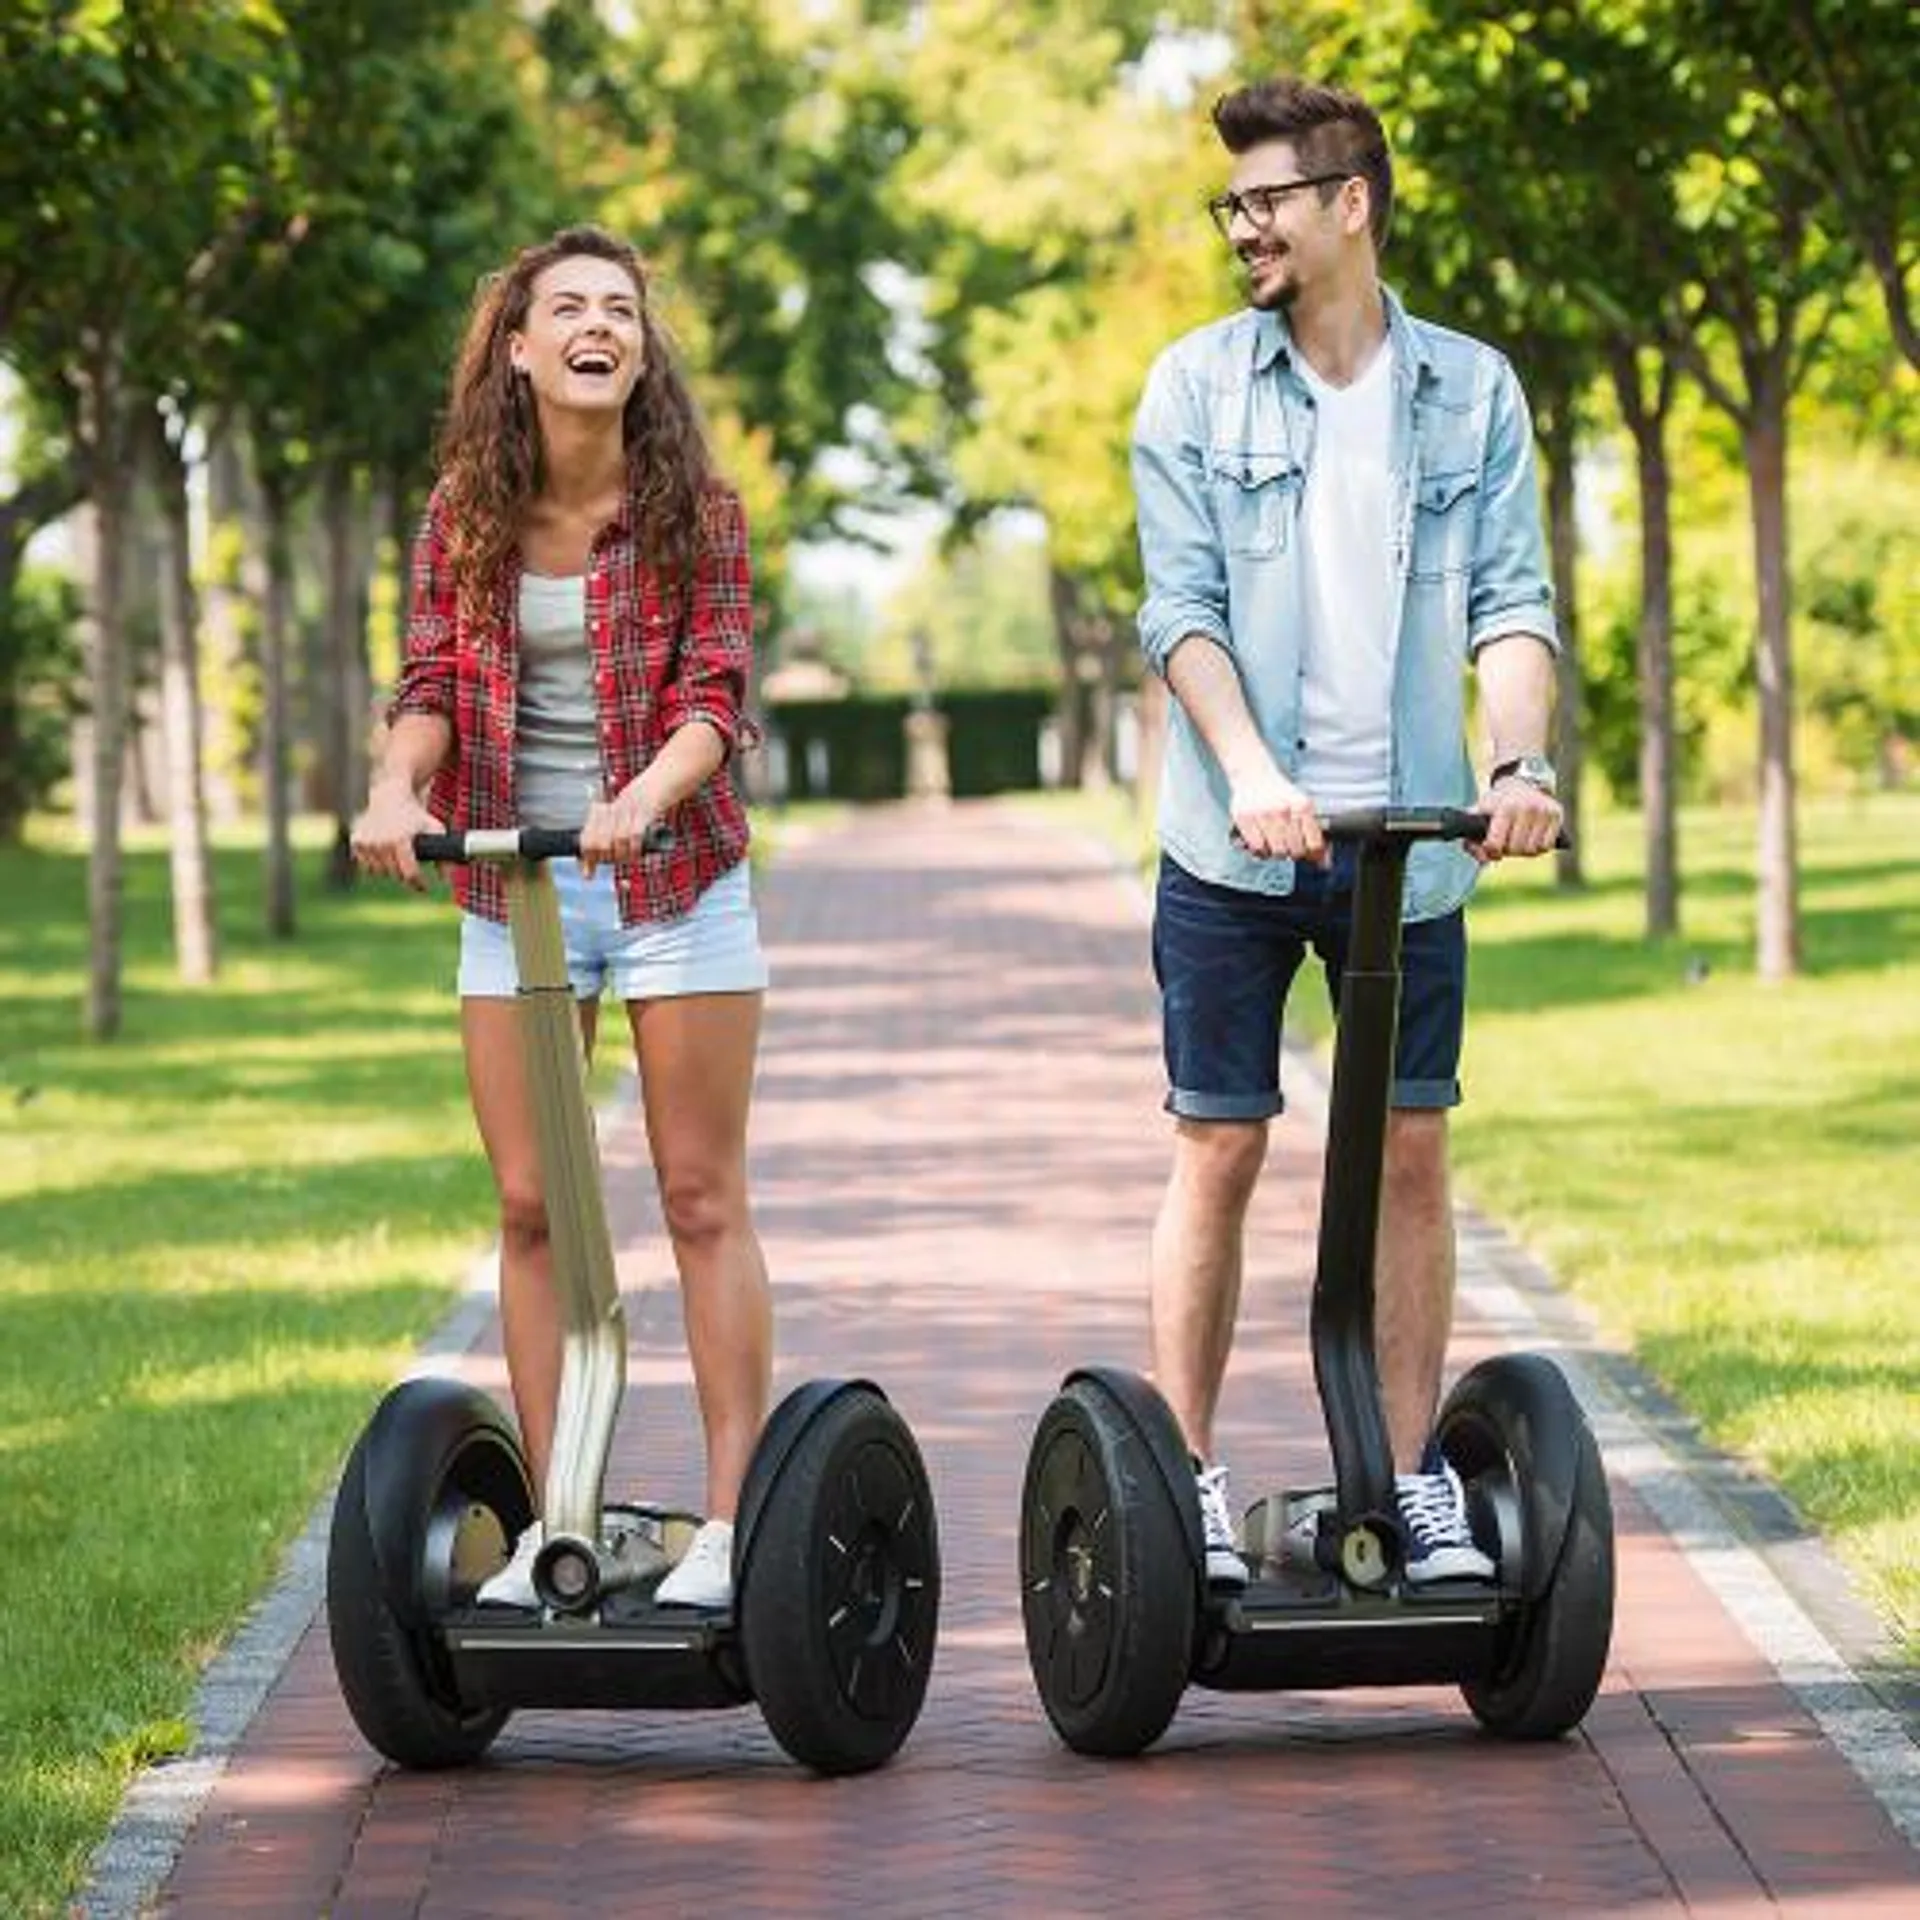 Segway Thrill for Two - Week Days Only